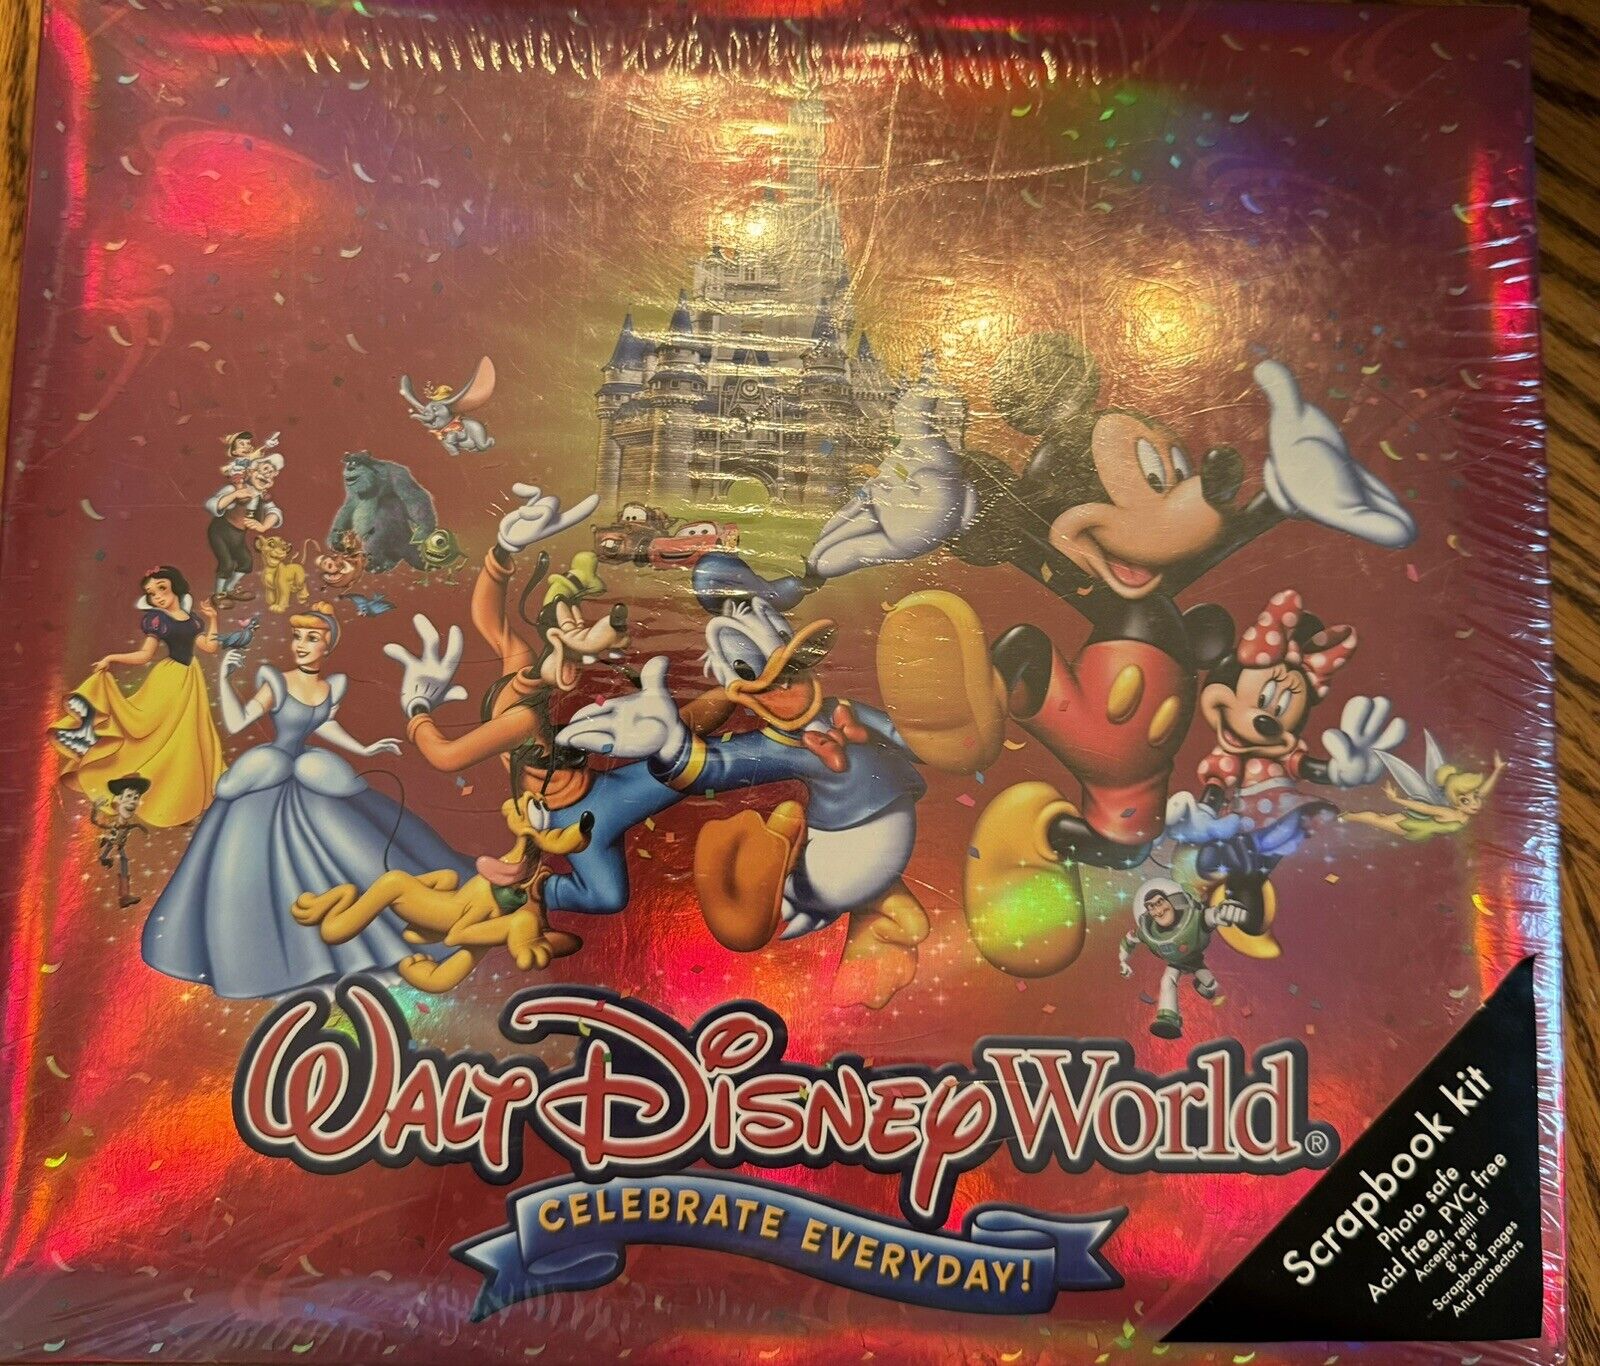 New Walt Disney World Scrapbook Starter Kit New Sealed From The 2000s/early 10s